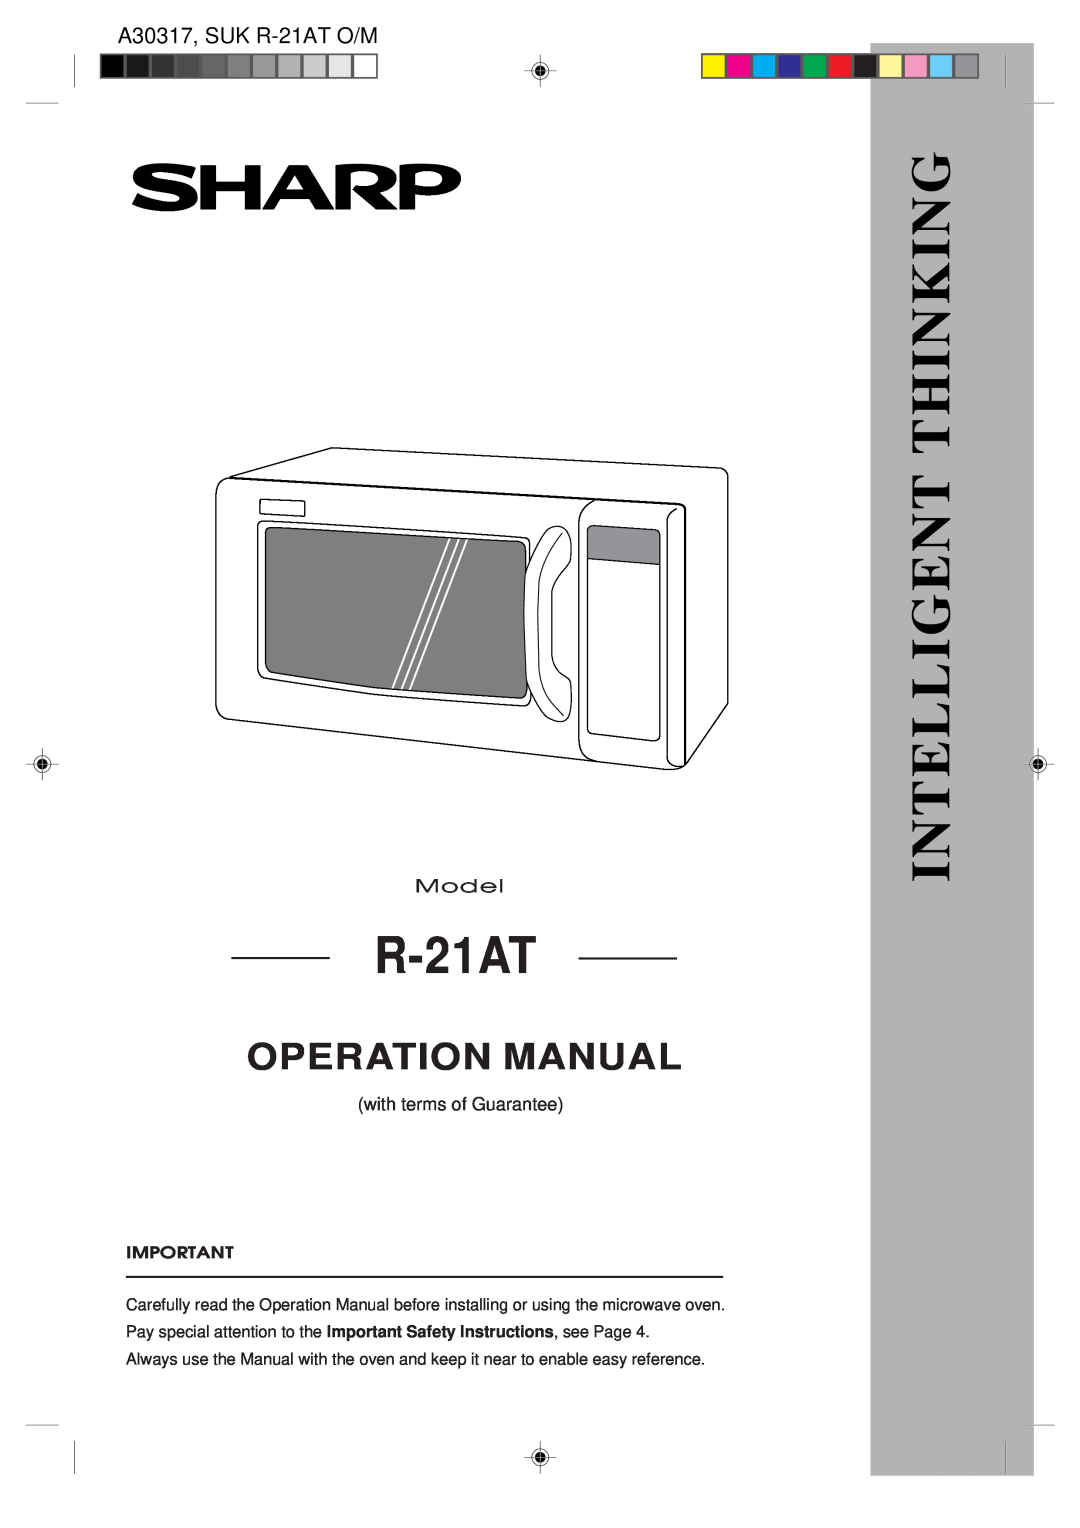 Sharp operation manual A30317, SUK R-21AT O/M, Model, with terms of Guarantee, Intelligent Thinking 